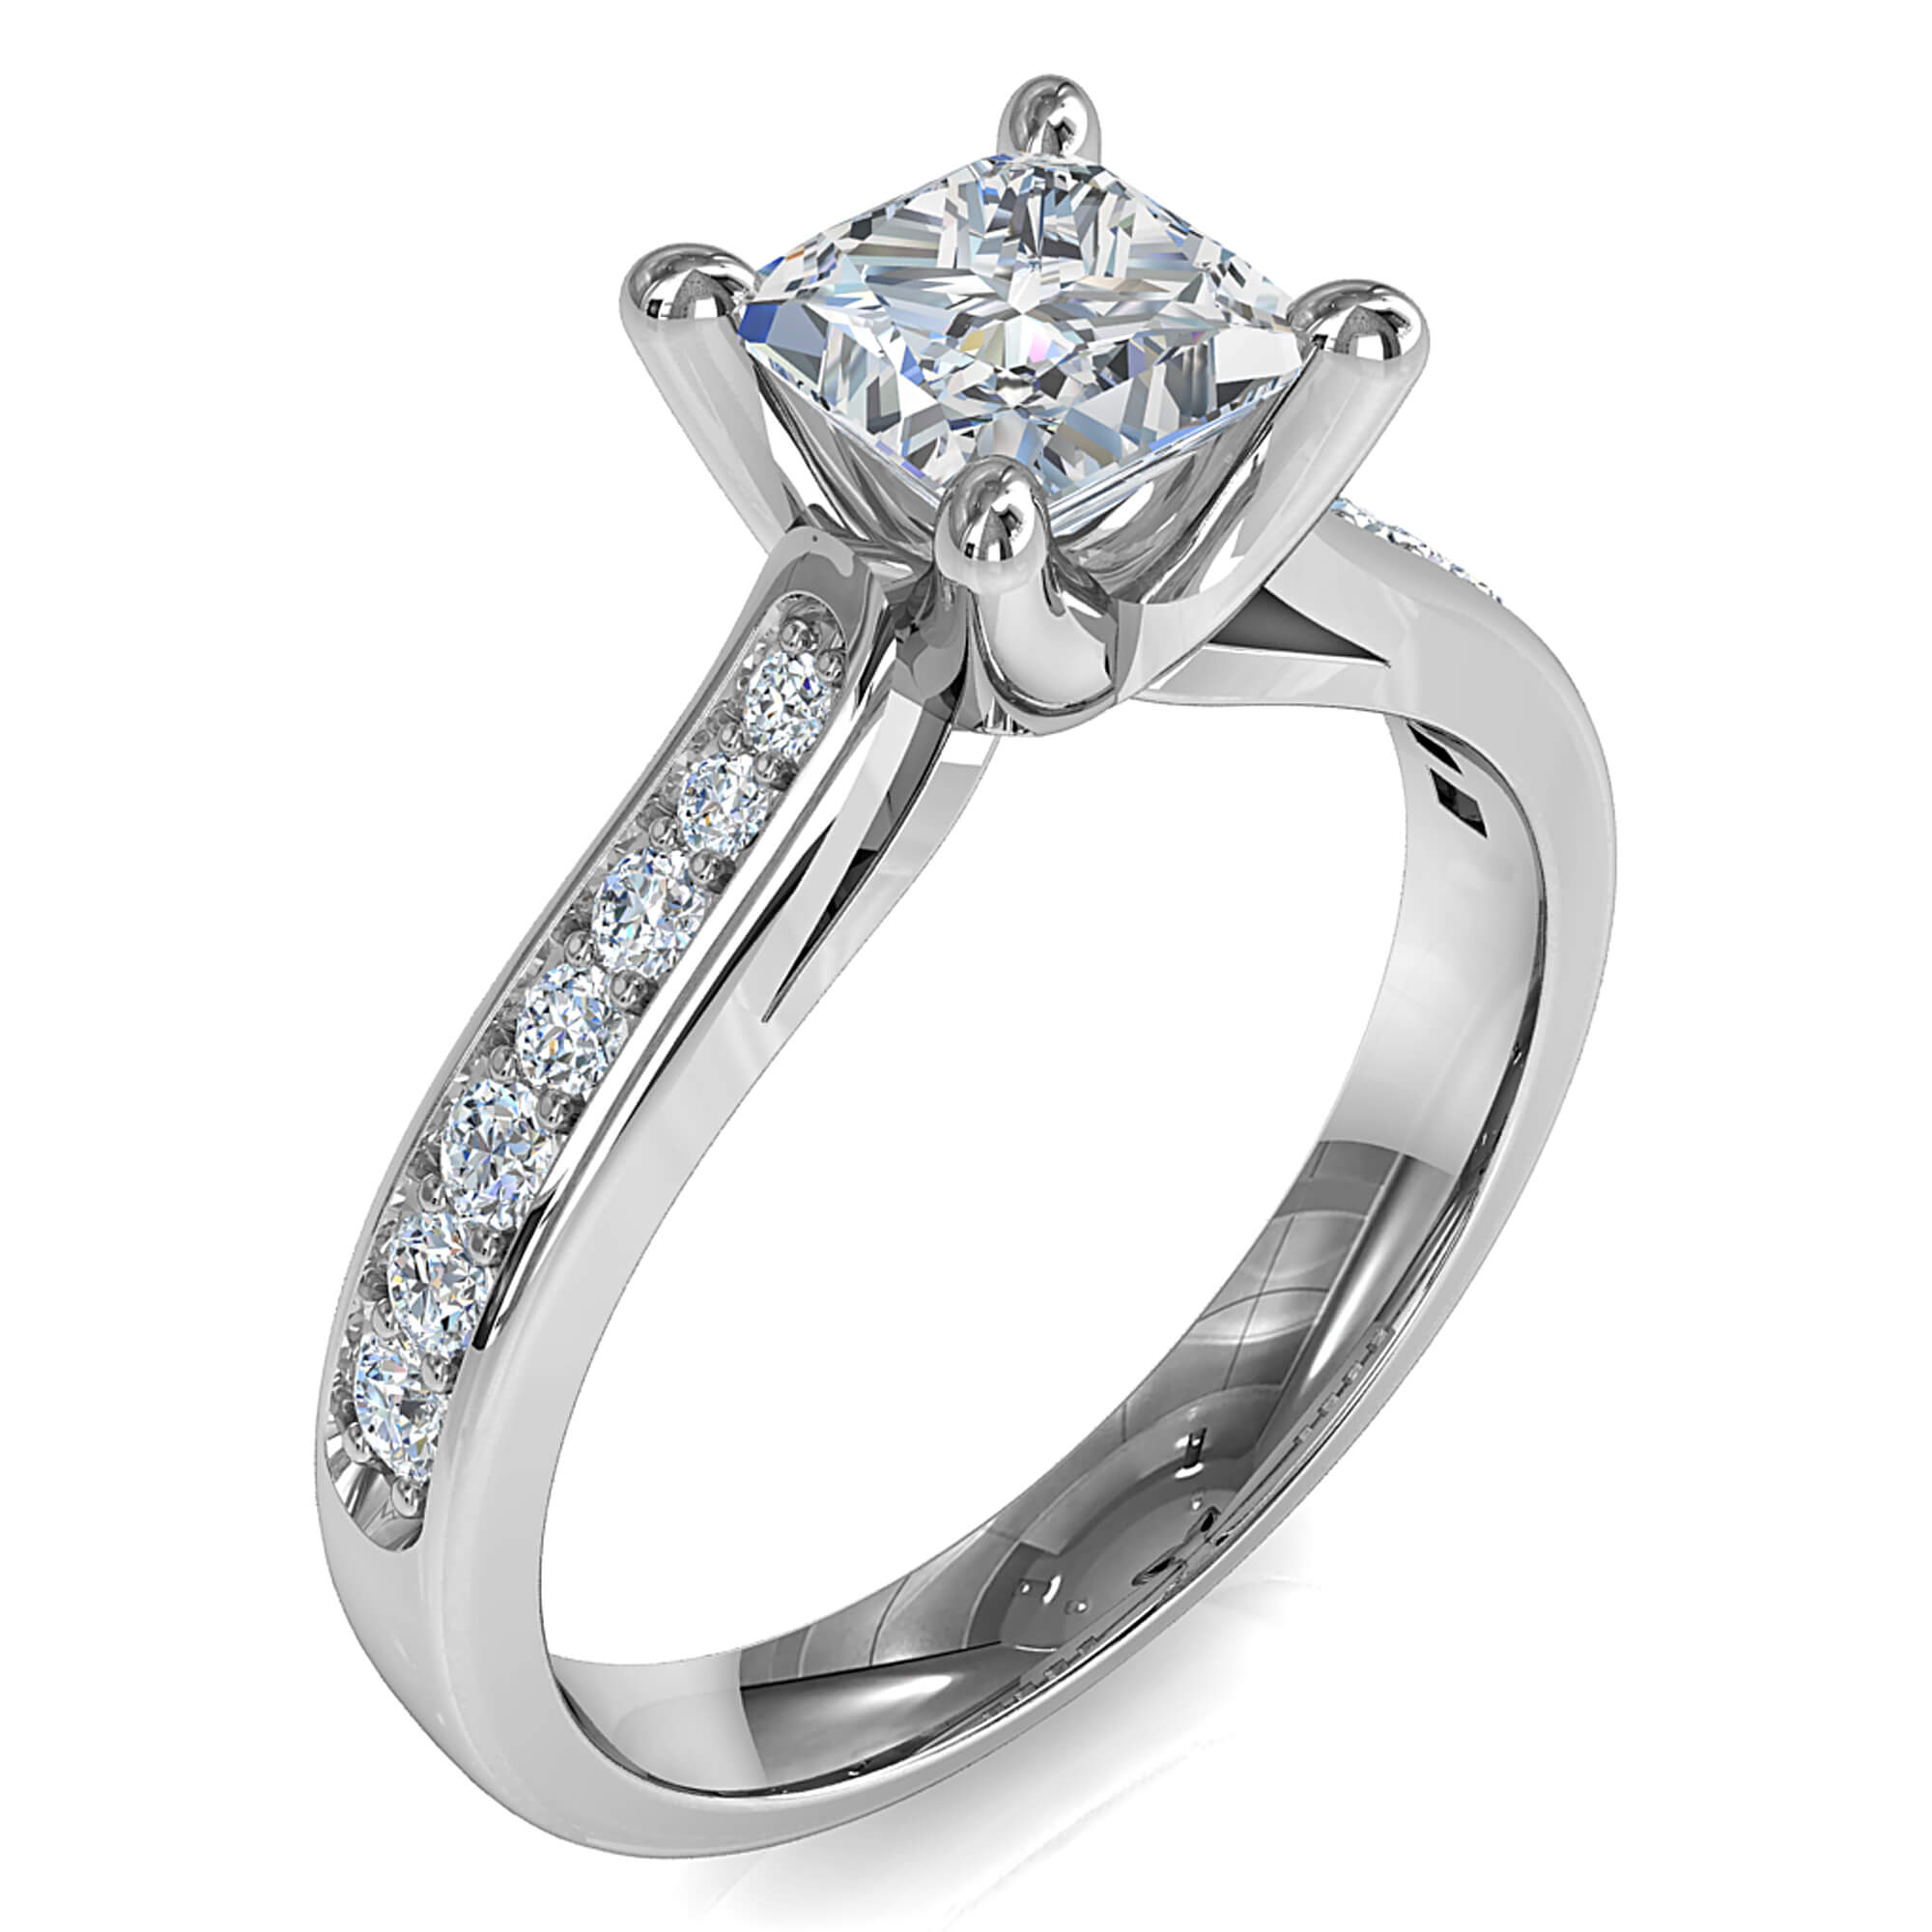 Princess Cut Solitaire Diamond Engagement Ring, 4 Pear Claws on a Tapered Bead Set Band.